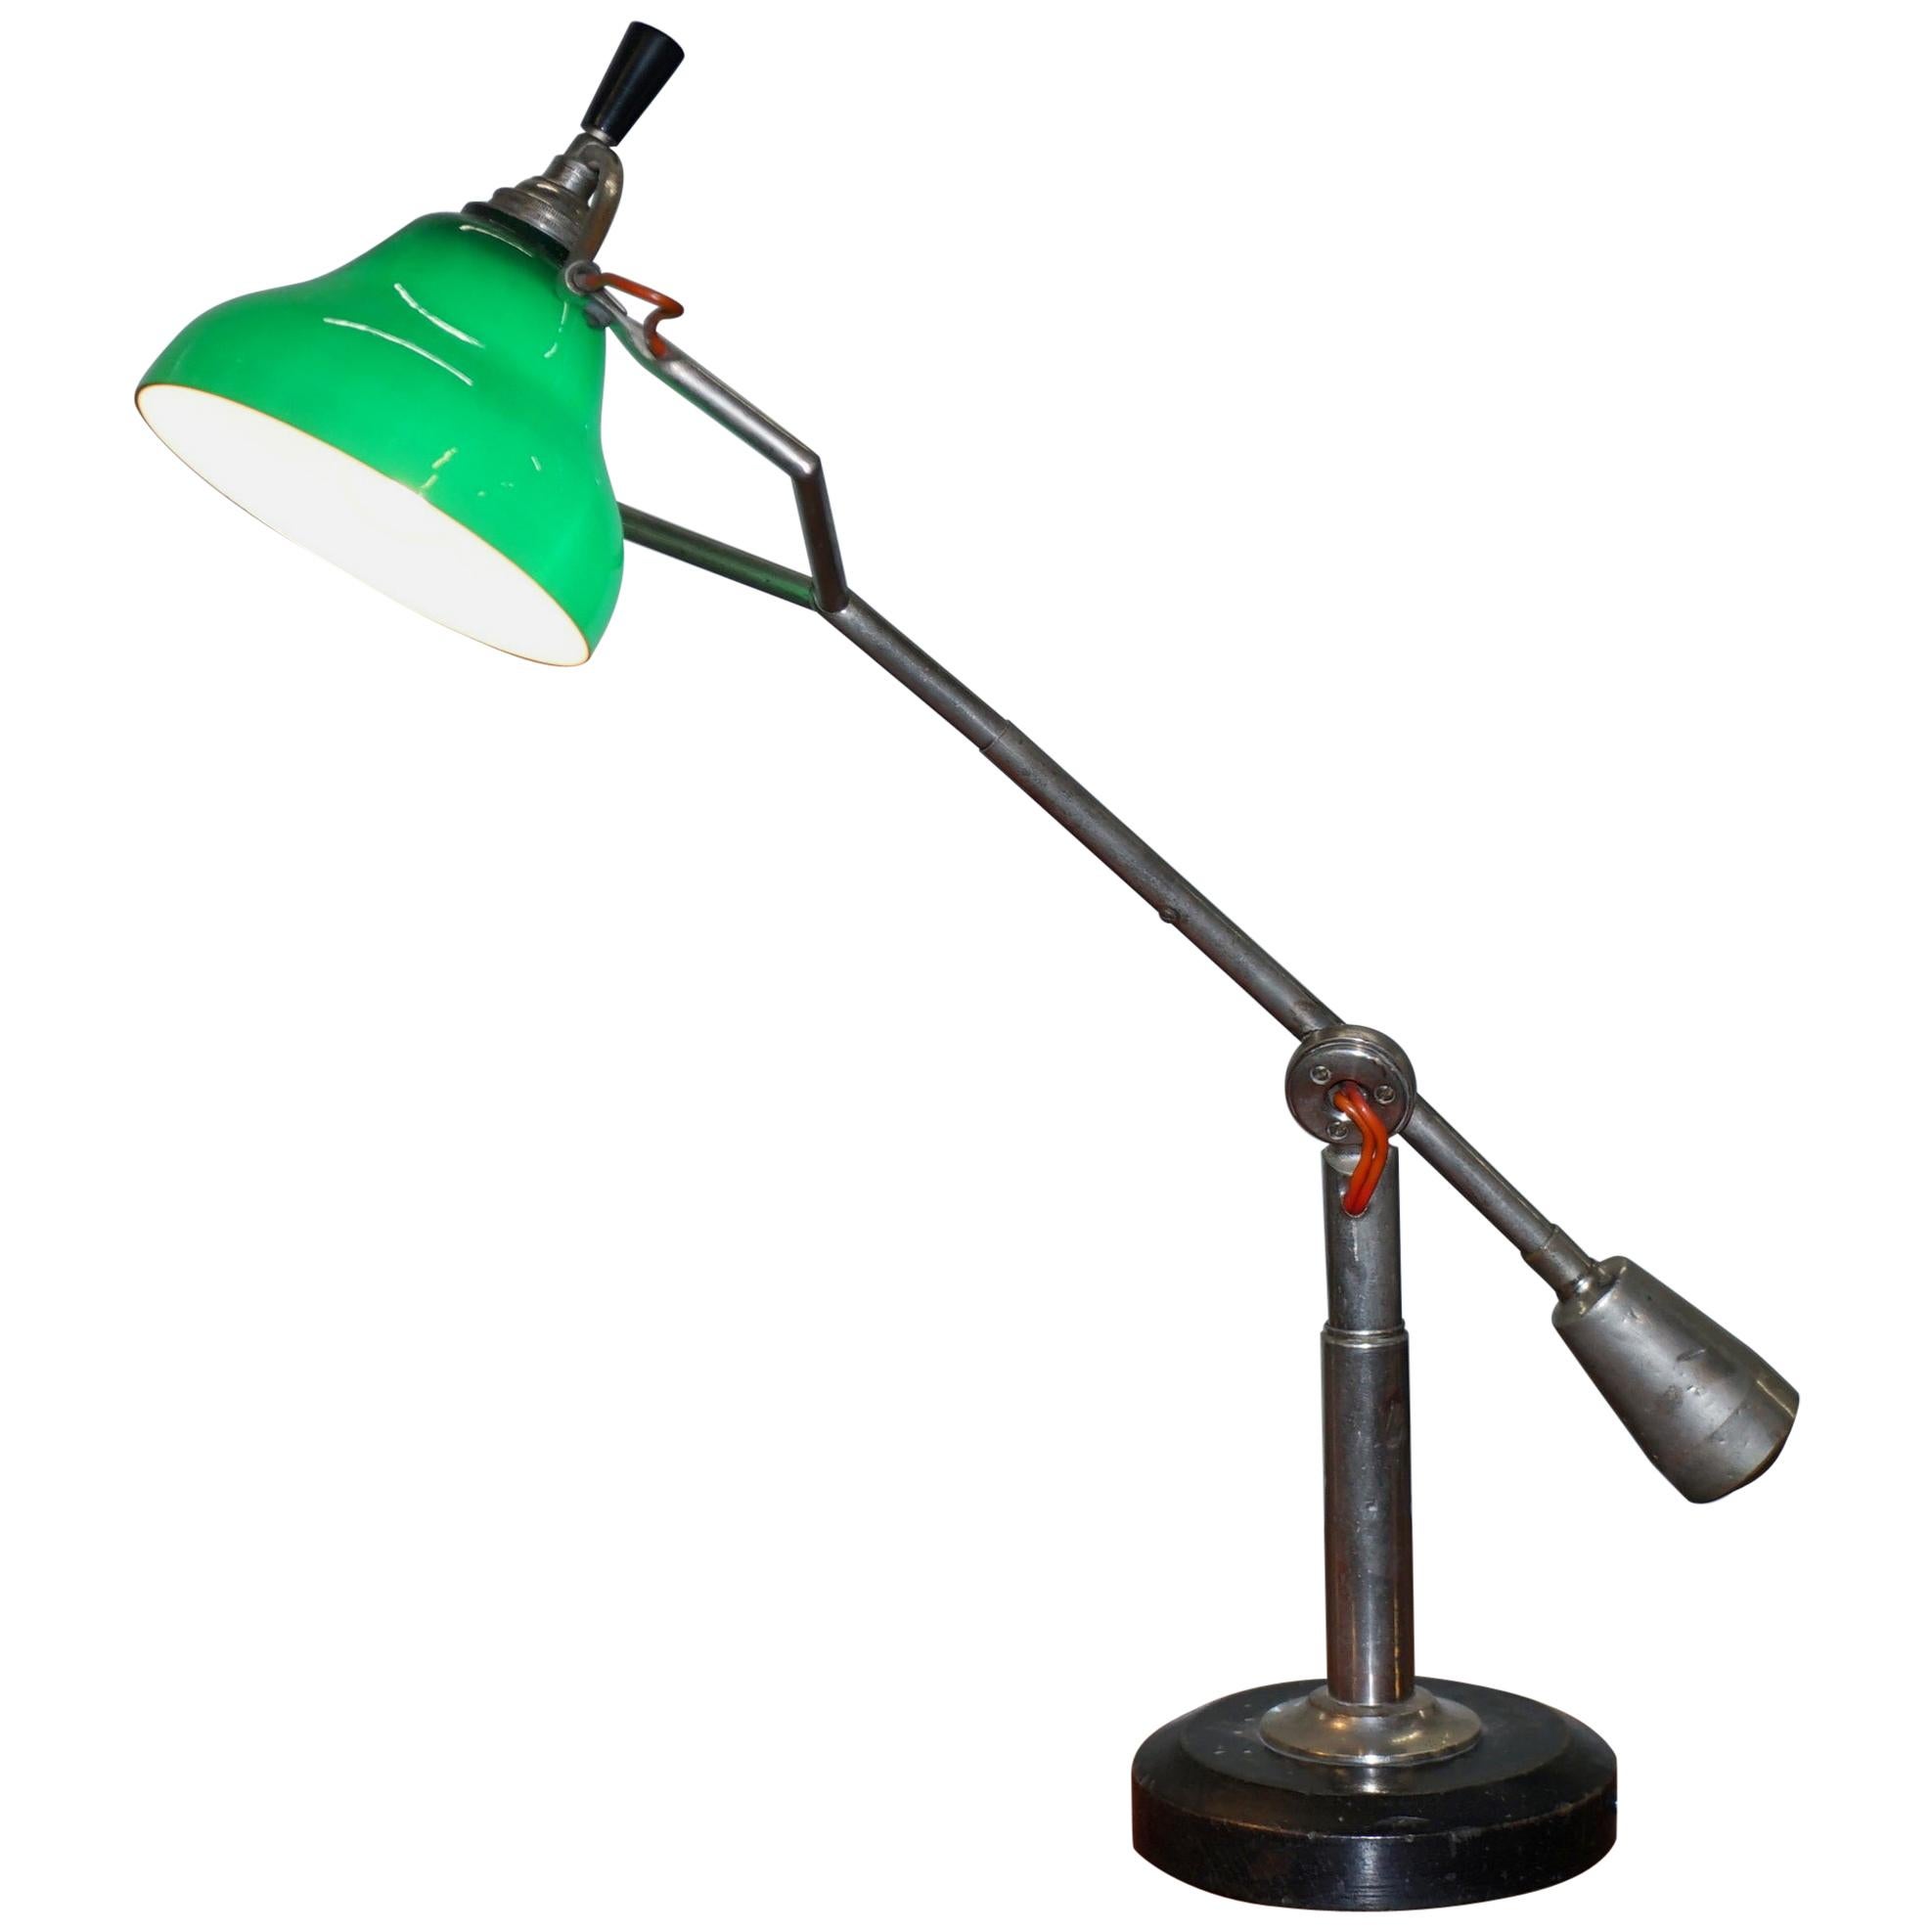 Rare Original circa 1925 Art Deco Edouard Wilfred Buquet French Articulated Lamp For Sale